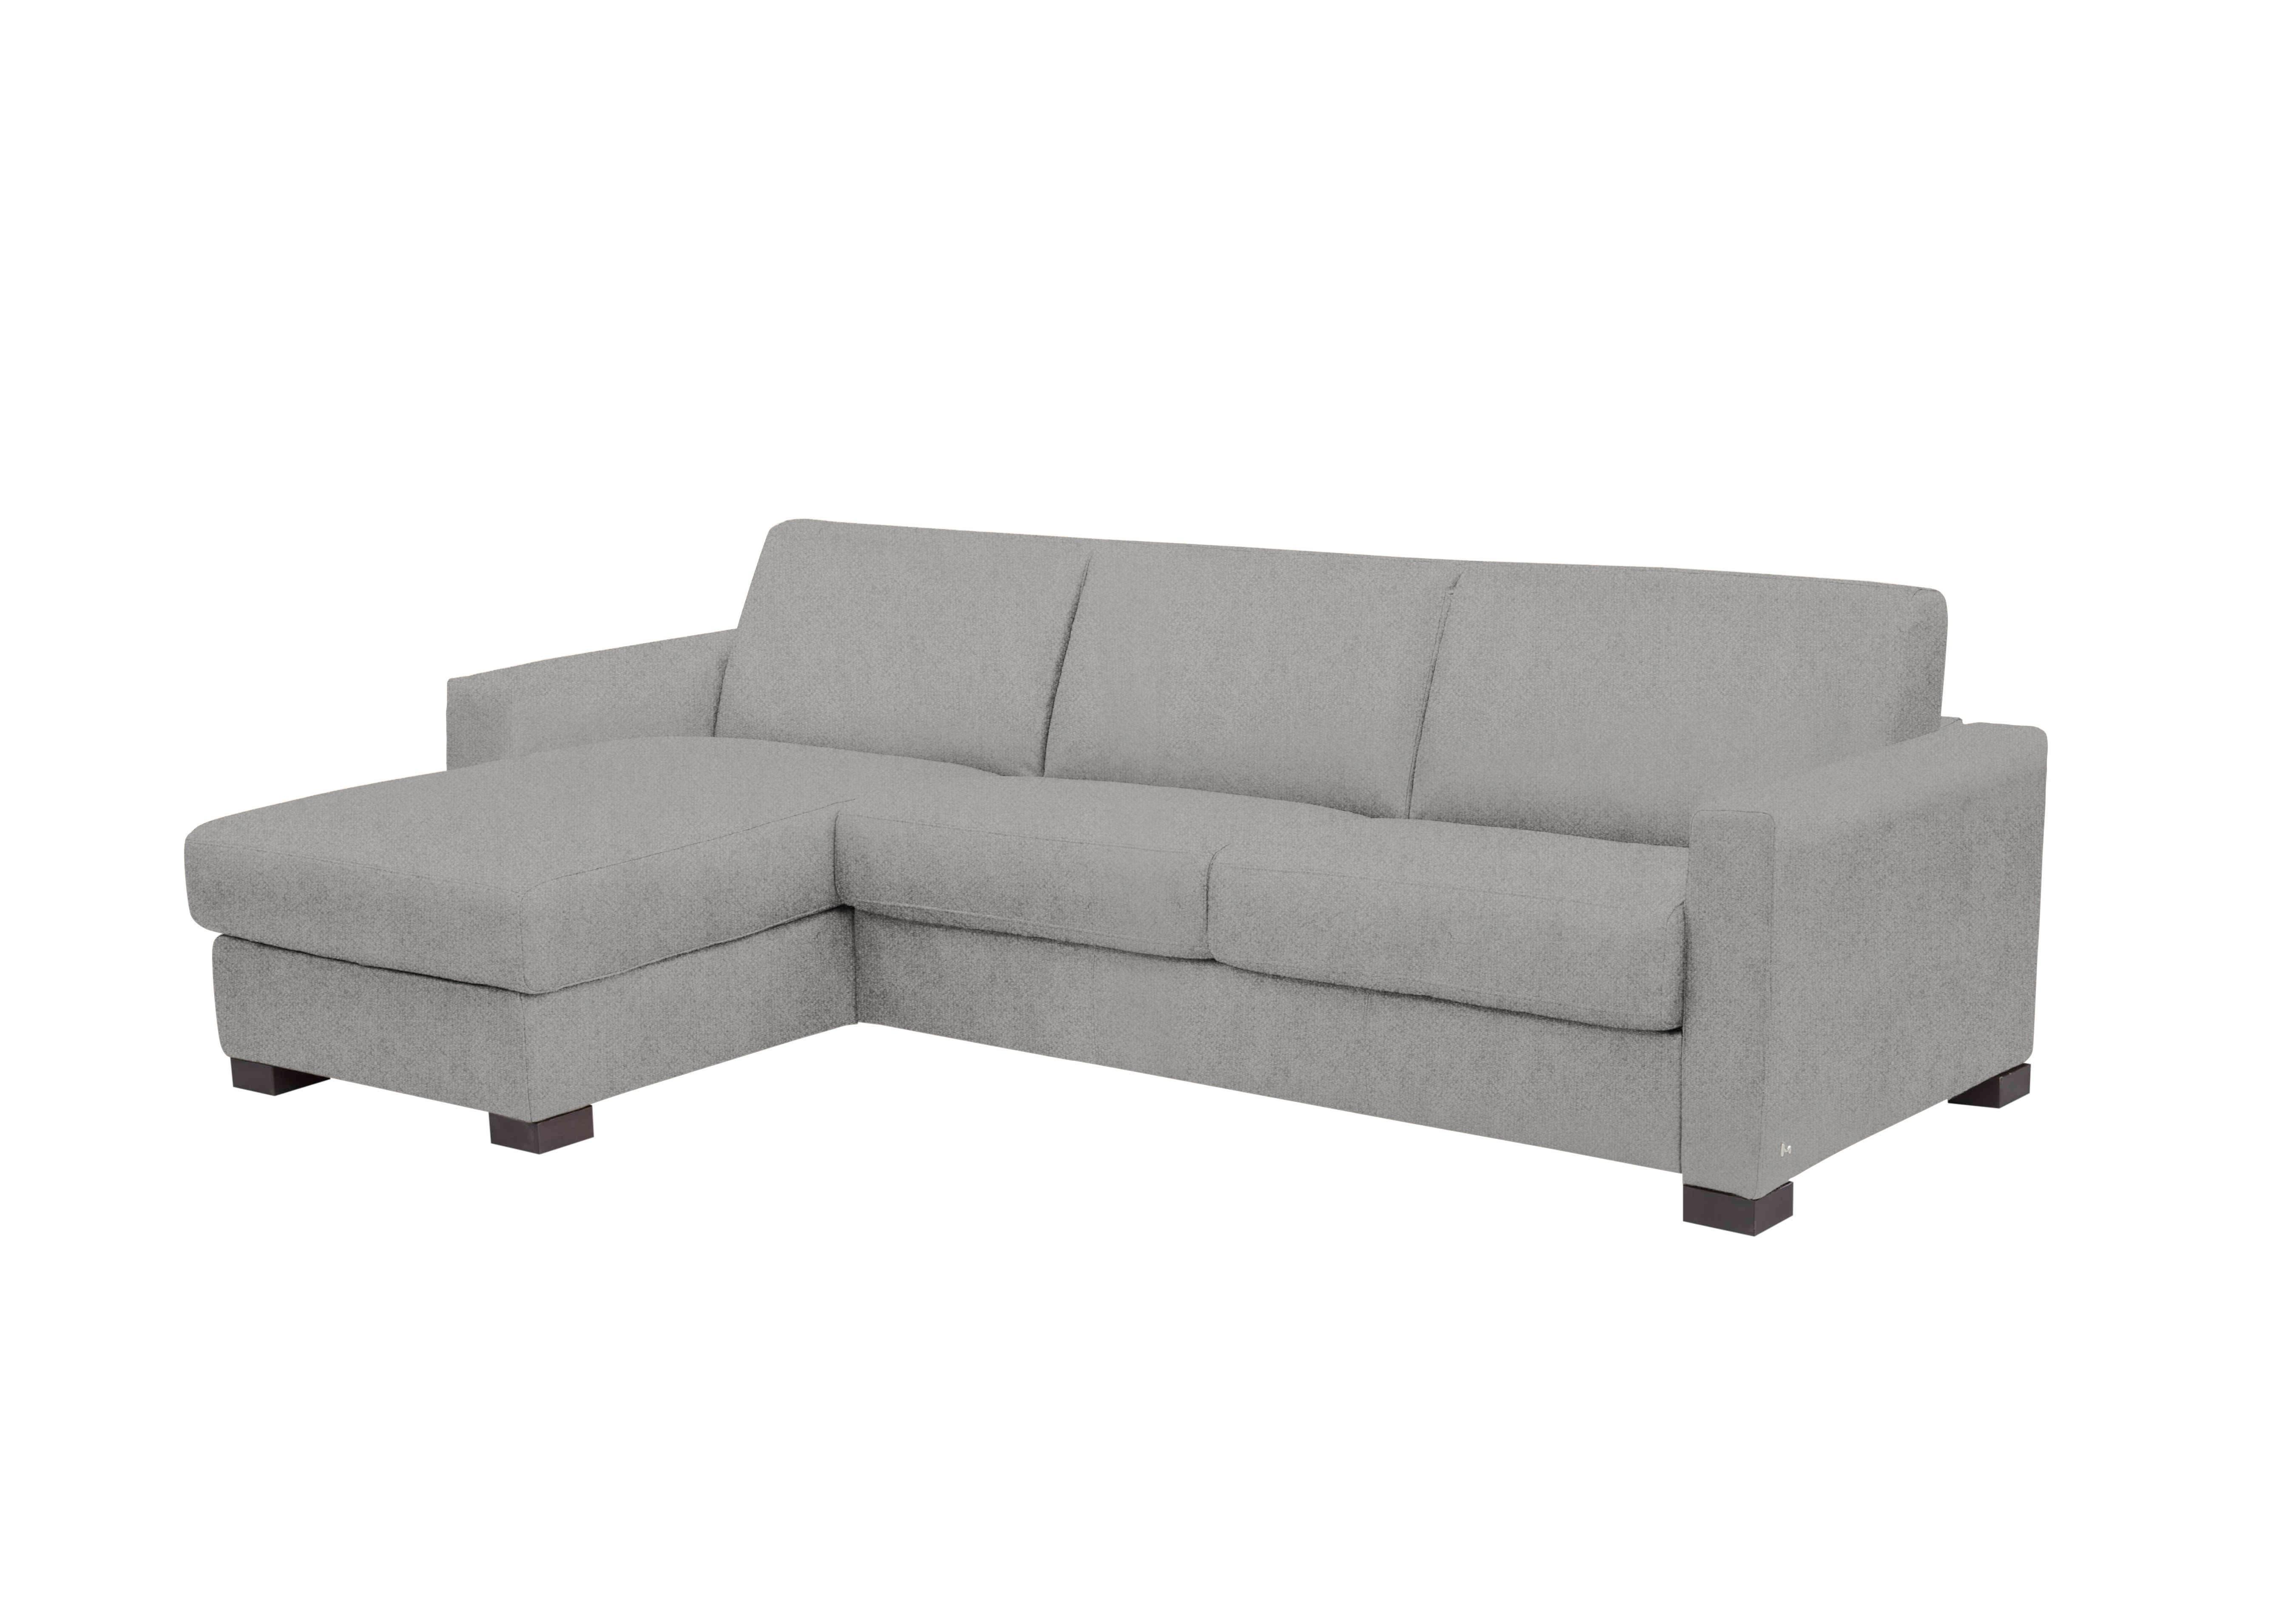 Alcova 3 Seater Fabric Sofa Bed with Storage Chaise with Box Arms in Fuente Ash on Furniture Village